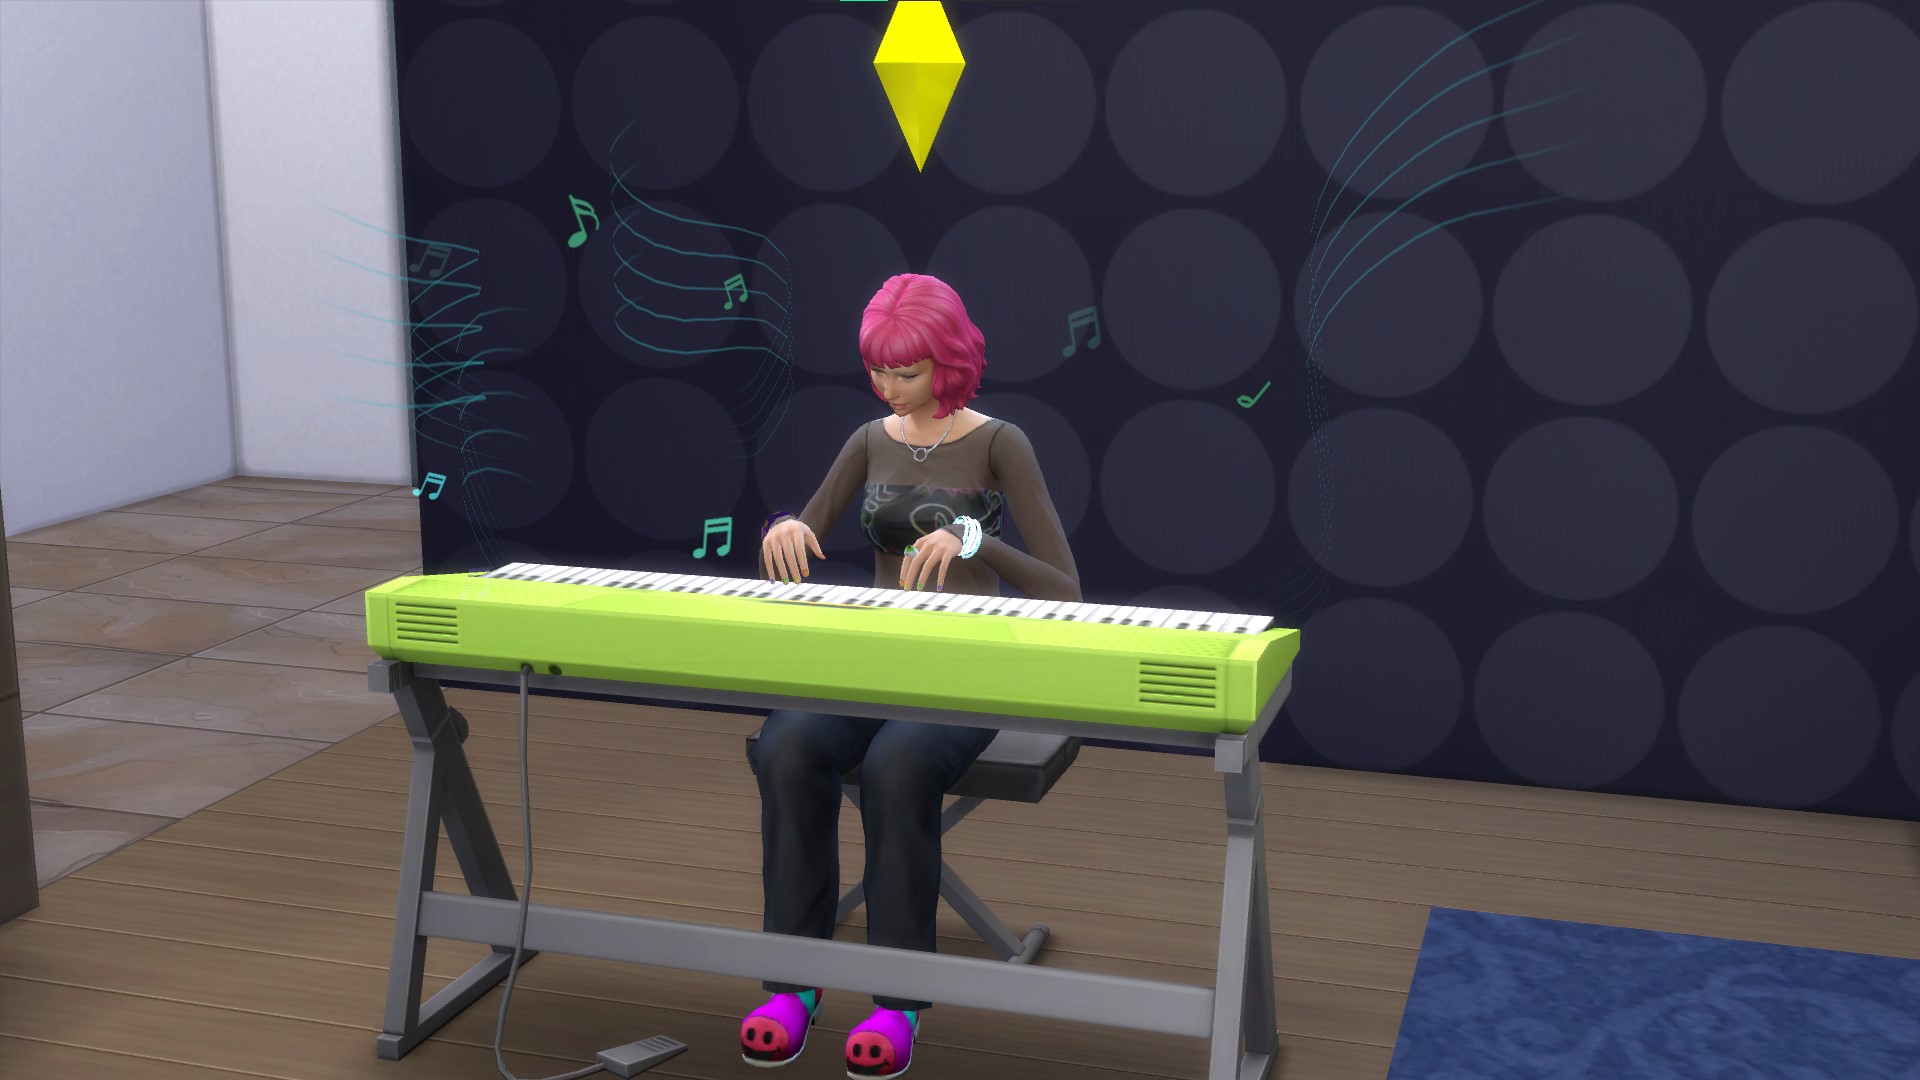  How to write songs in The Sims 4 with your Sim's instrument of choice 